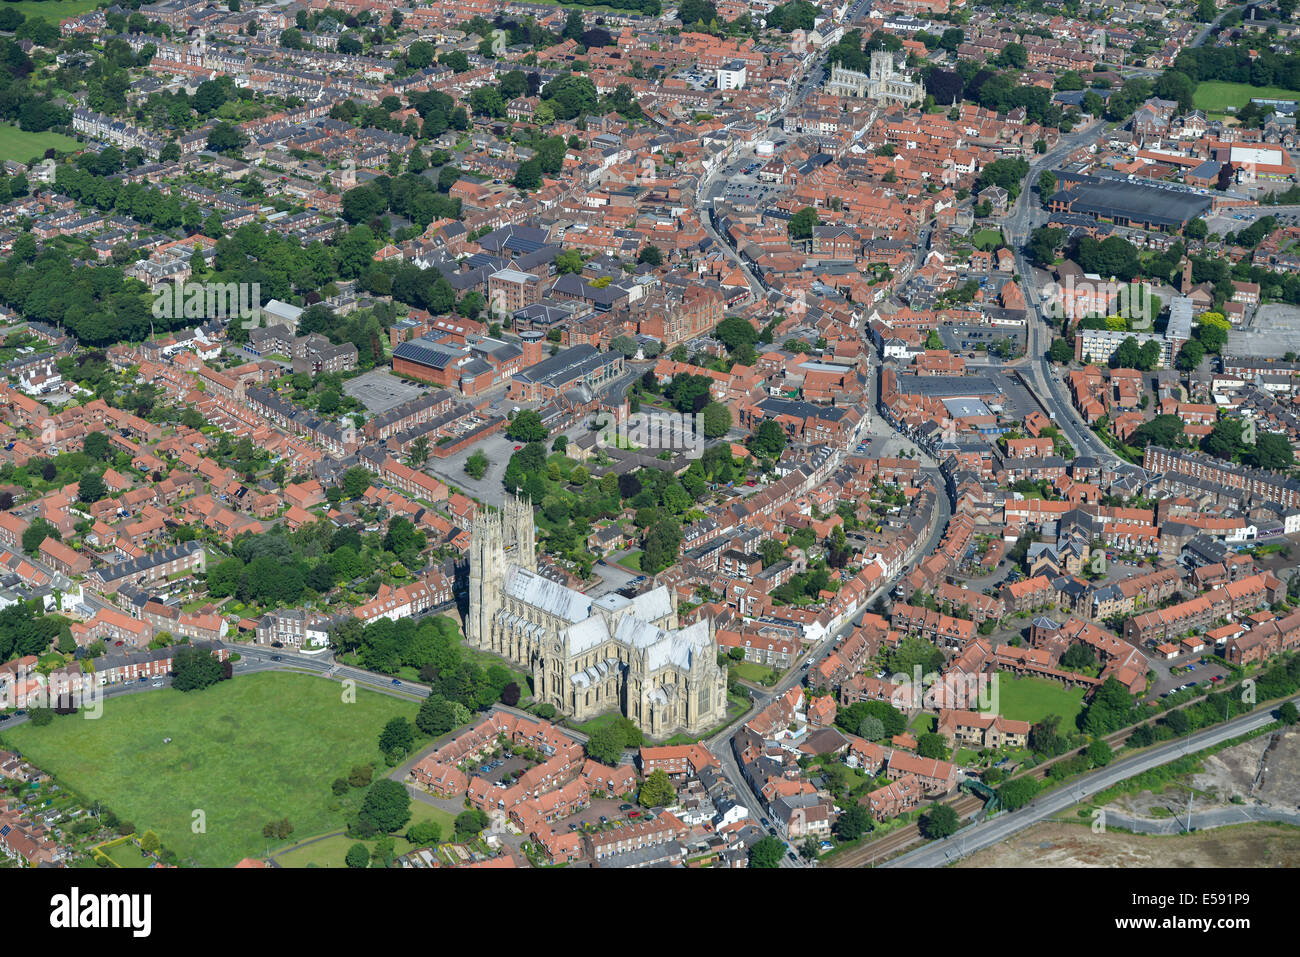 An aerial view of the centre of Beverley. A town in East Yorkshire, UK. Stock Photo